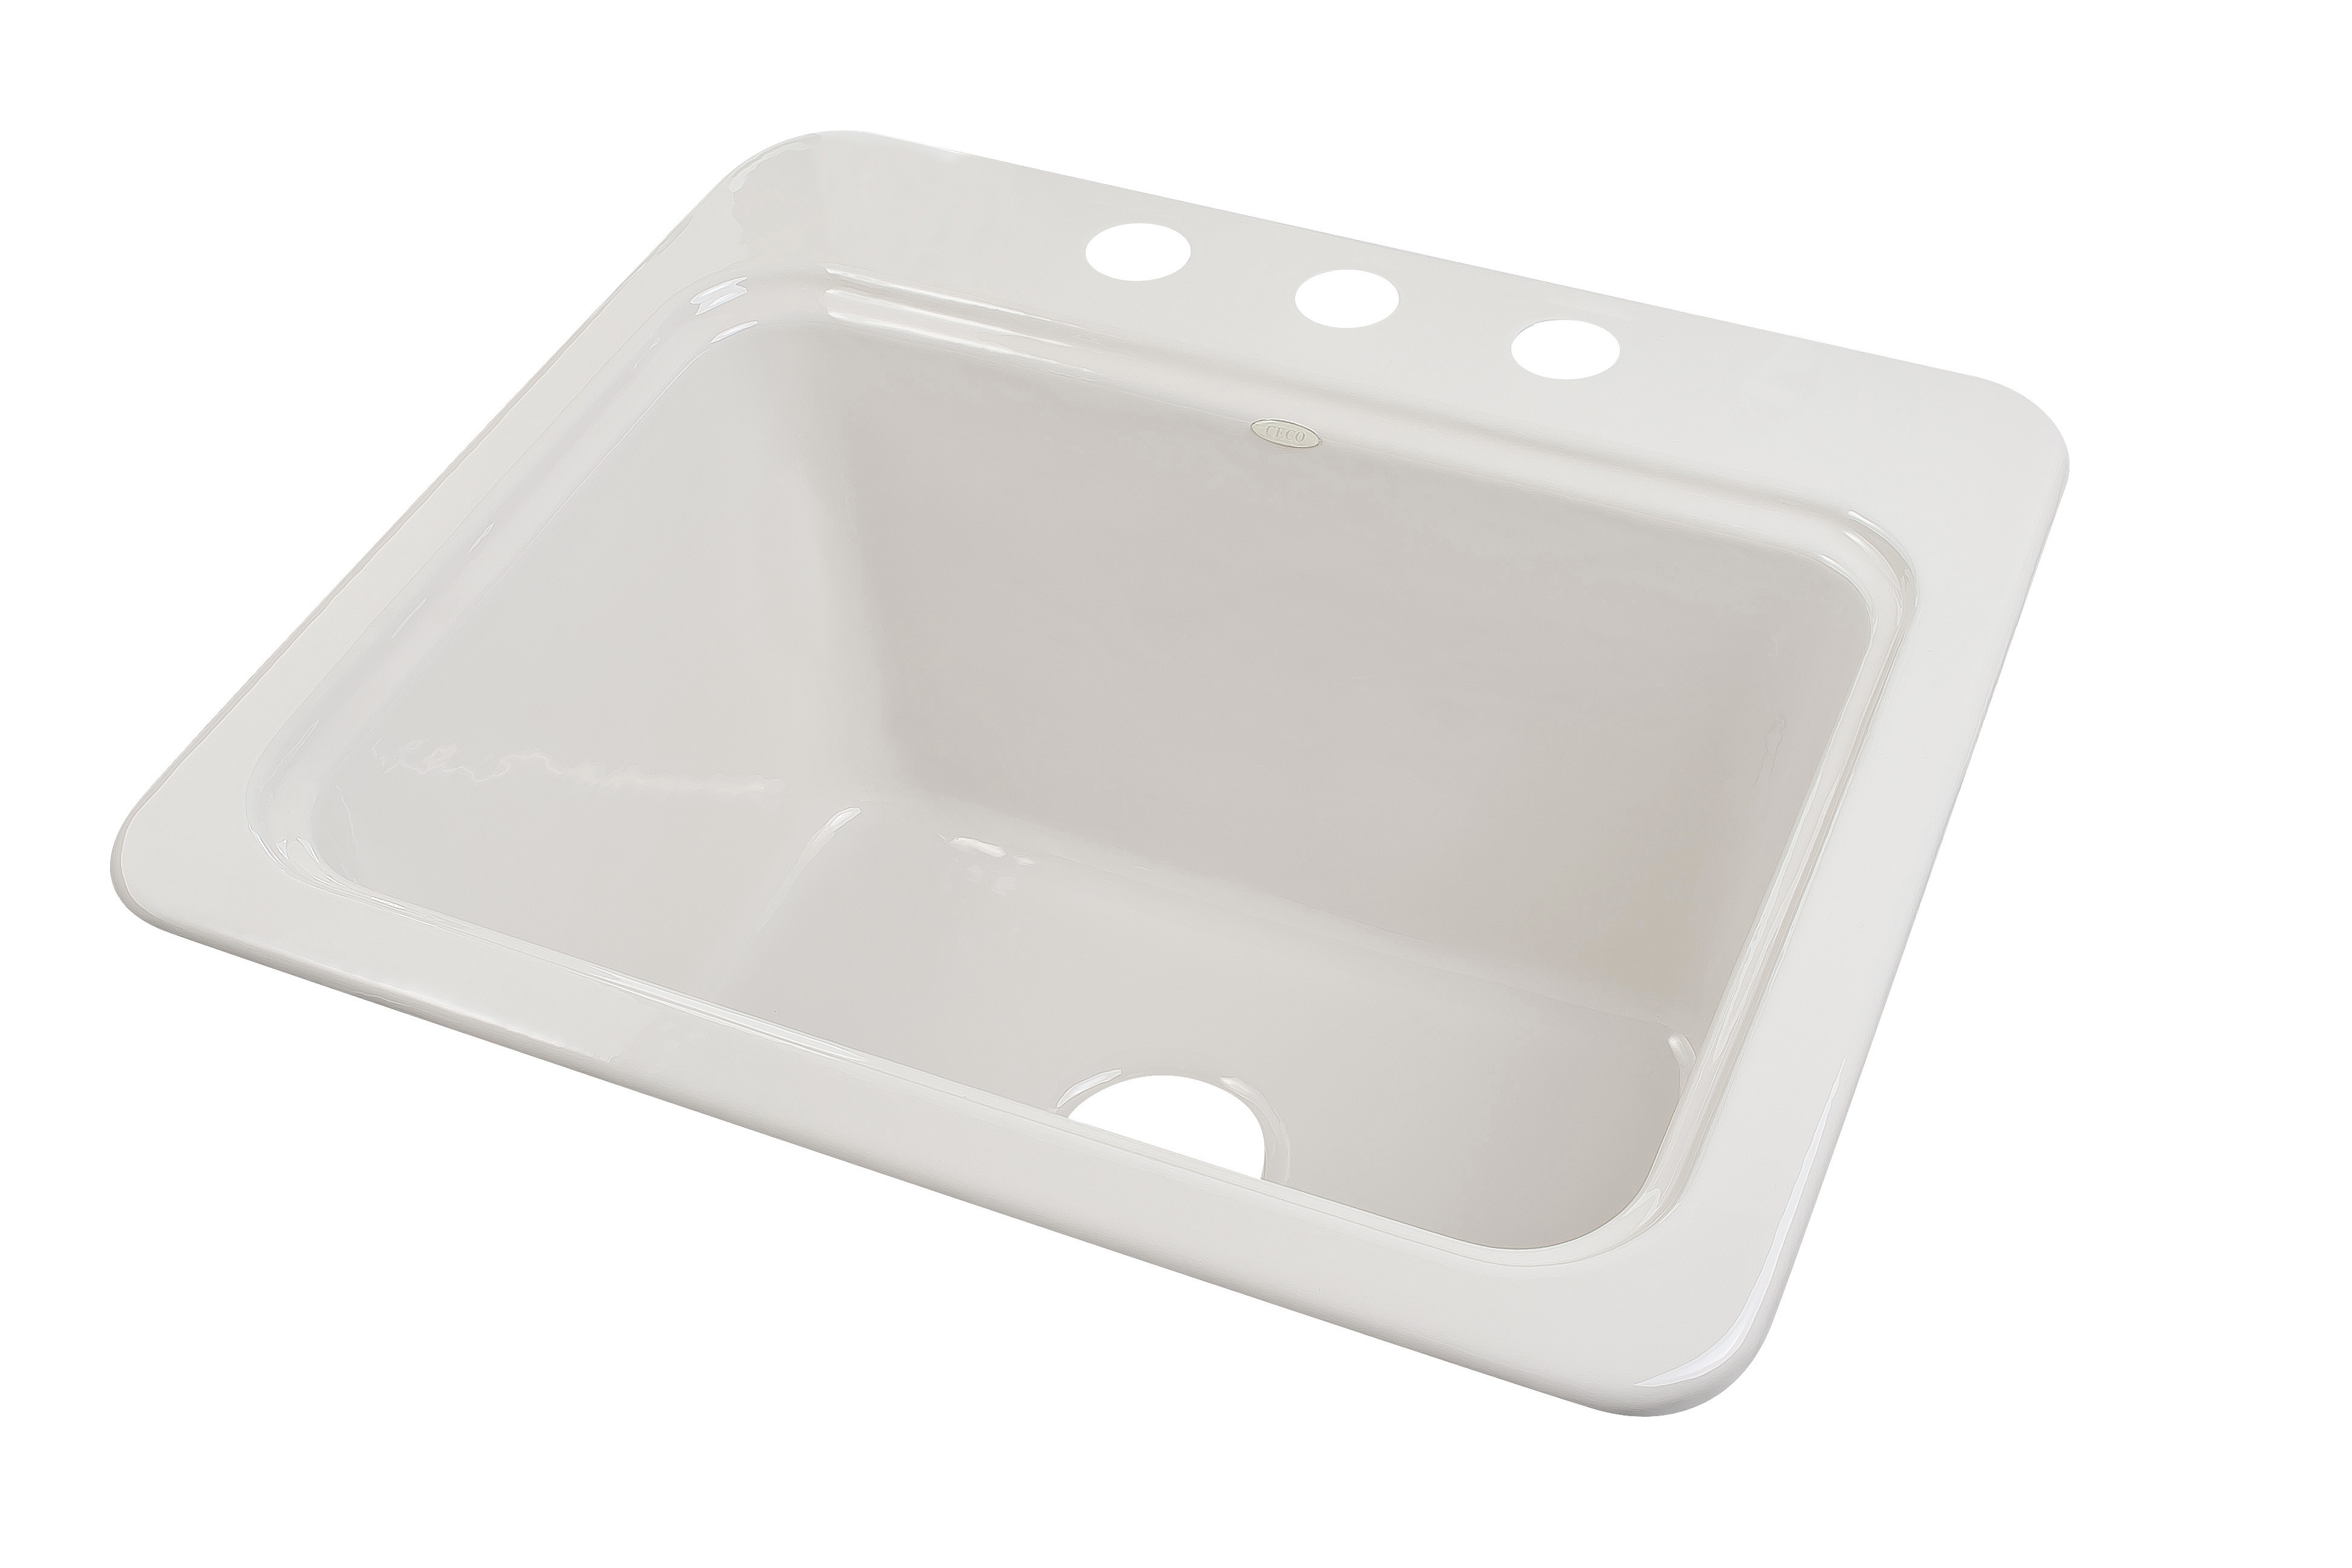 Biscuit CECO 857-3 Designer Cast Iron Laundry Sink 25'' x 22'' with Extra Deep Bowl